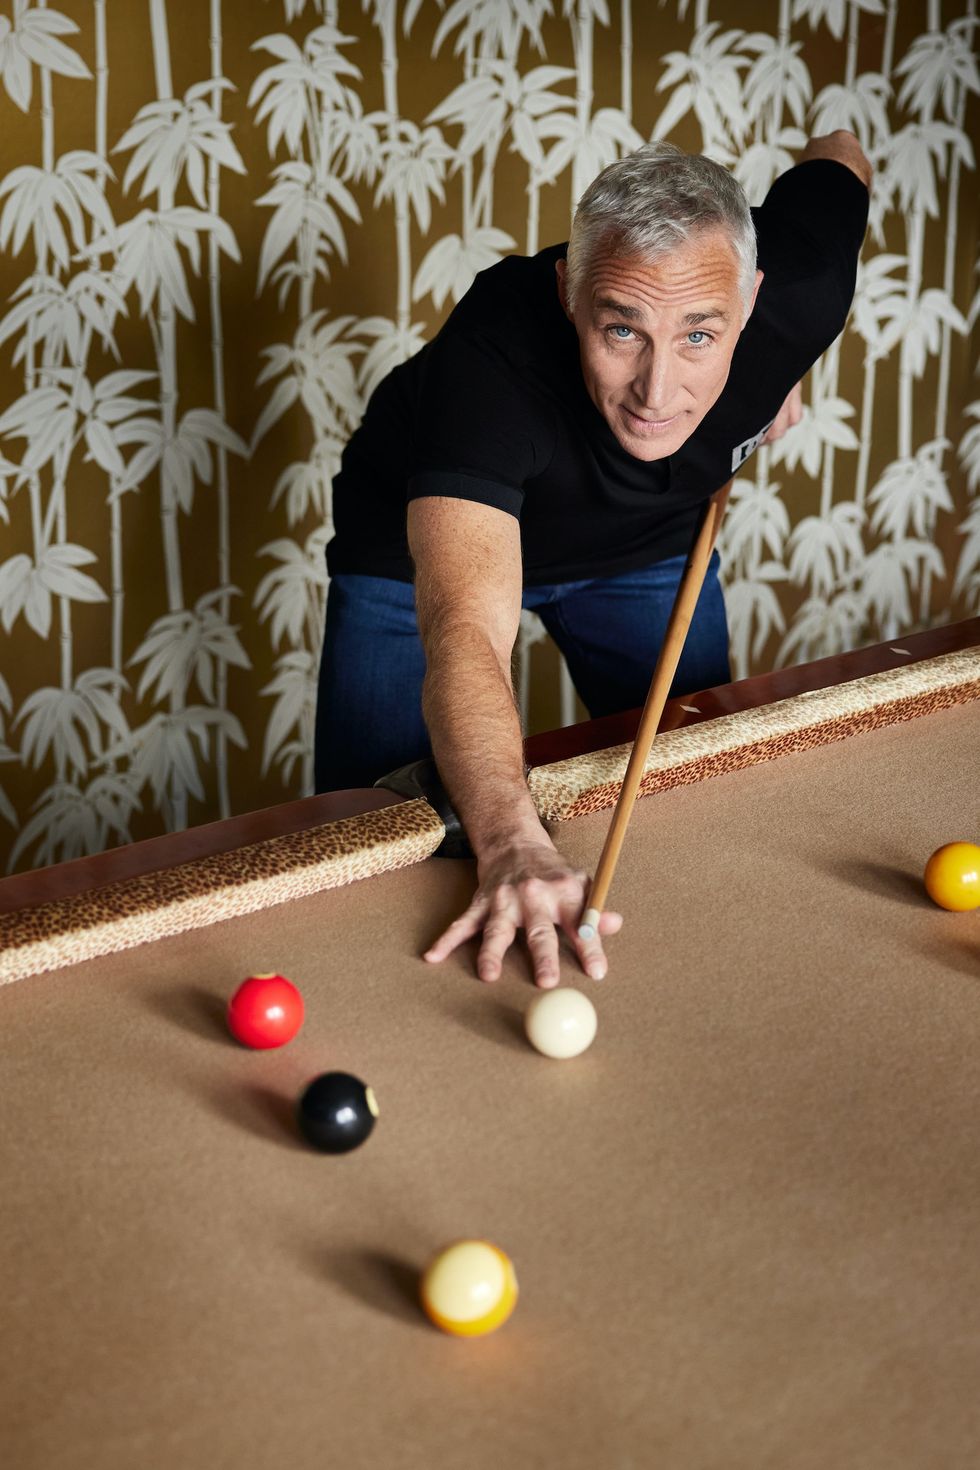 peter culpo playing pool